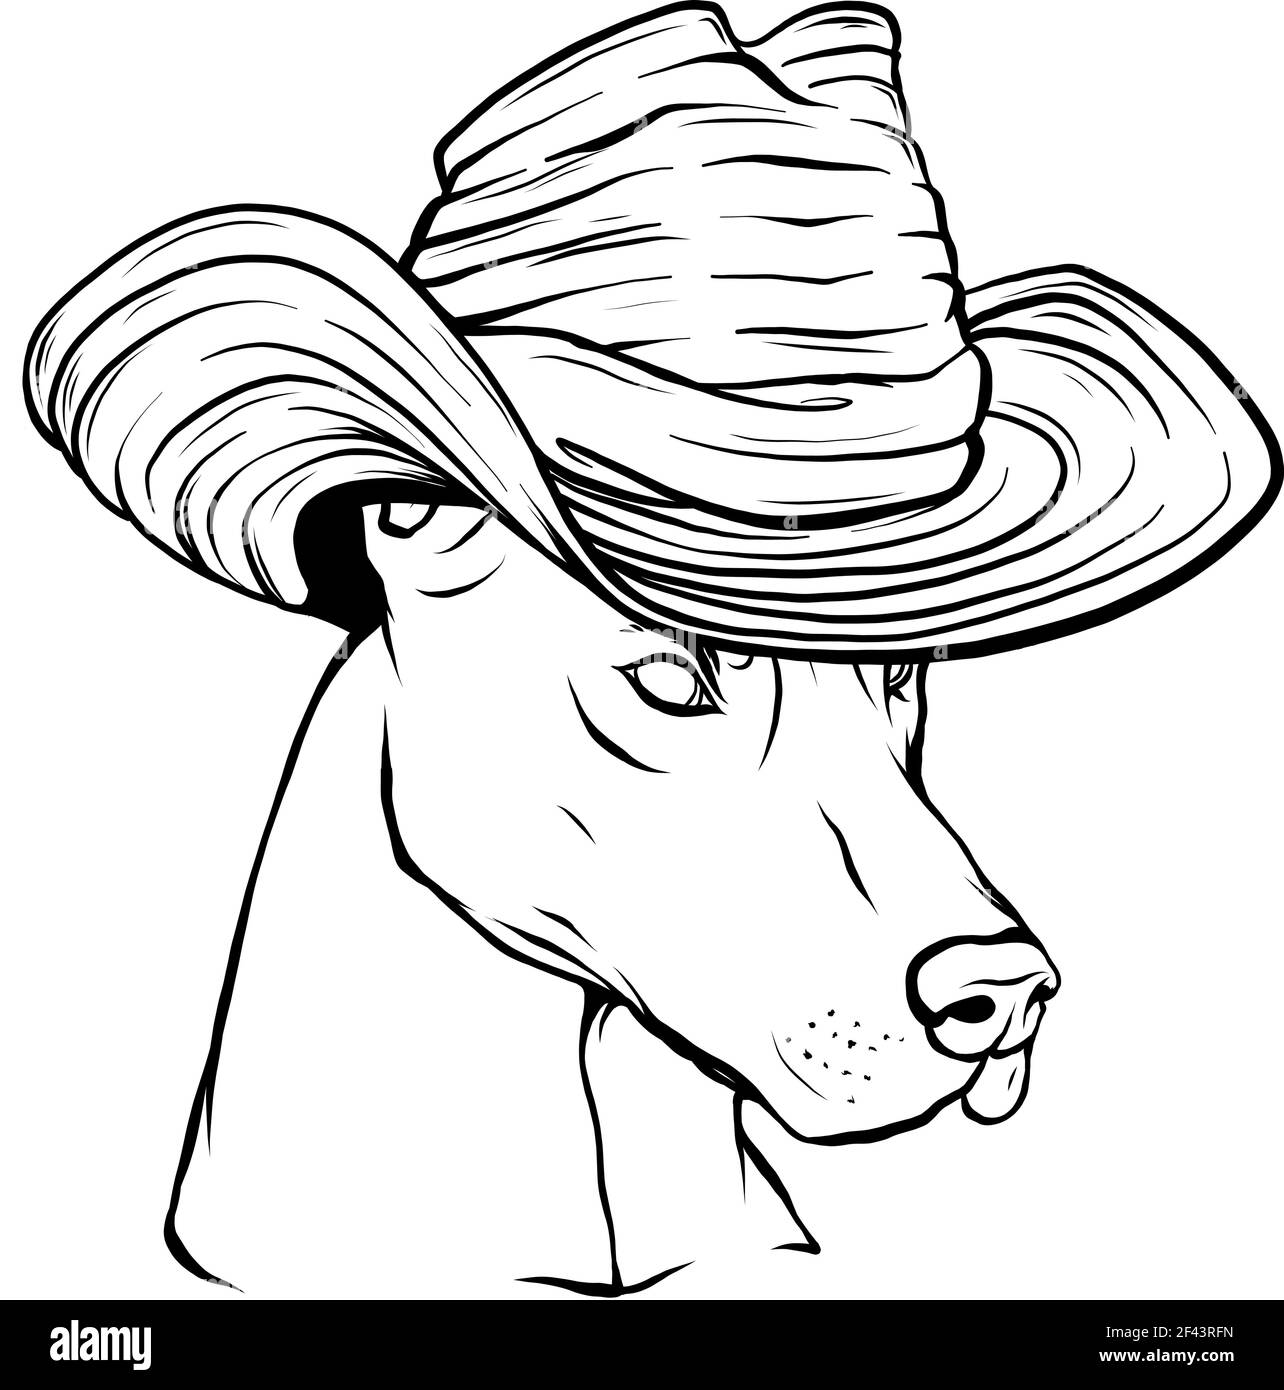 draw in black and white of head Dobermann dog with hat vector illustration Stock Vector